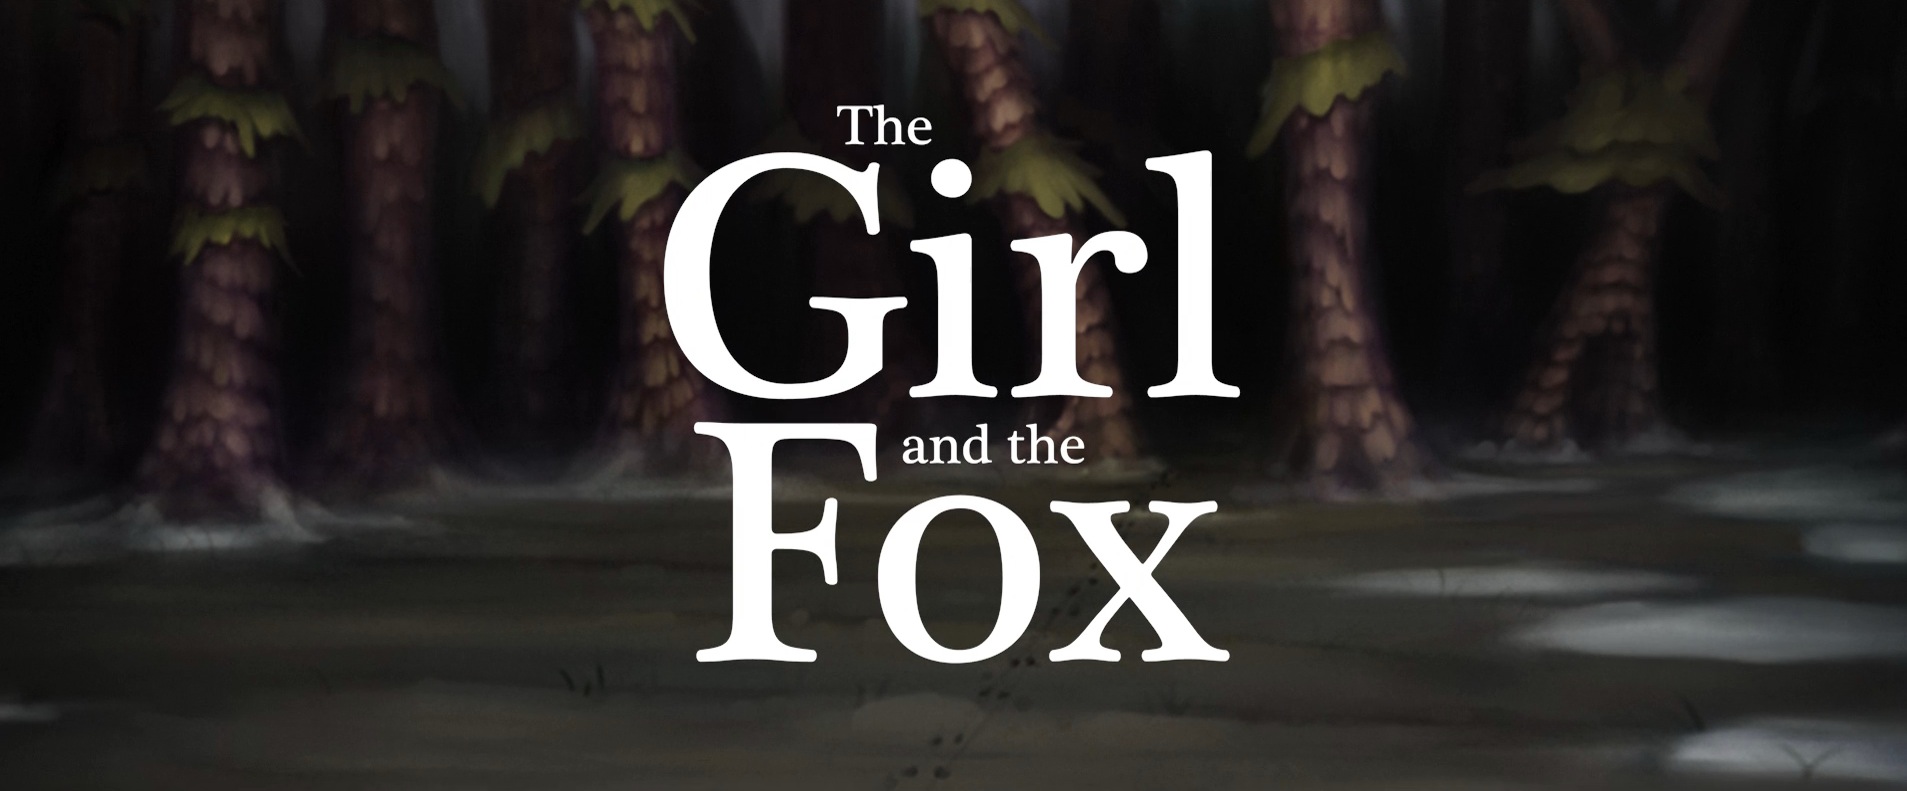 The Girl and the Fox6